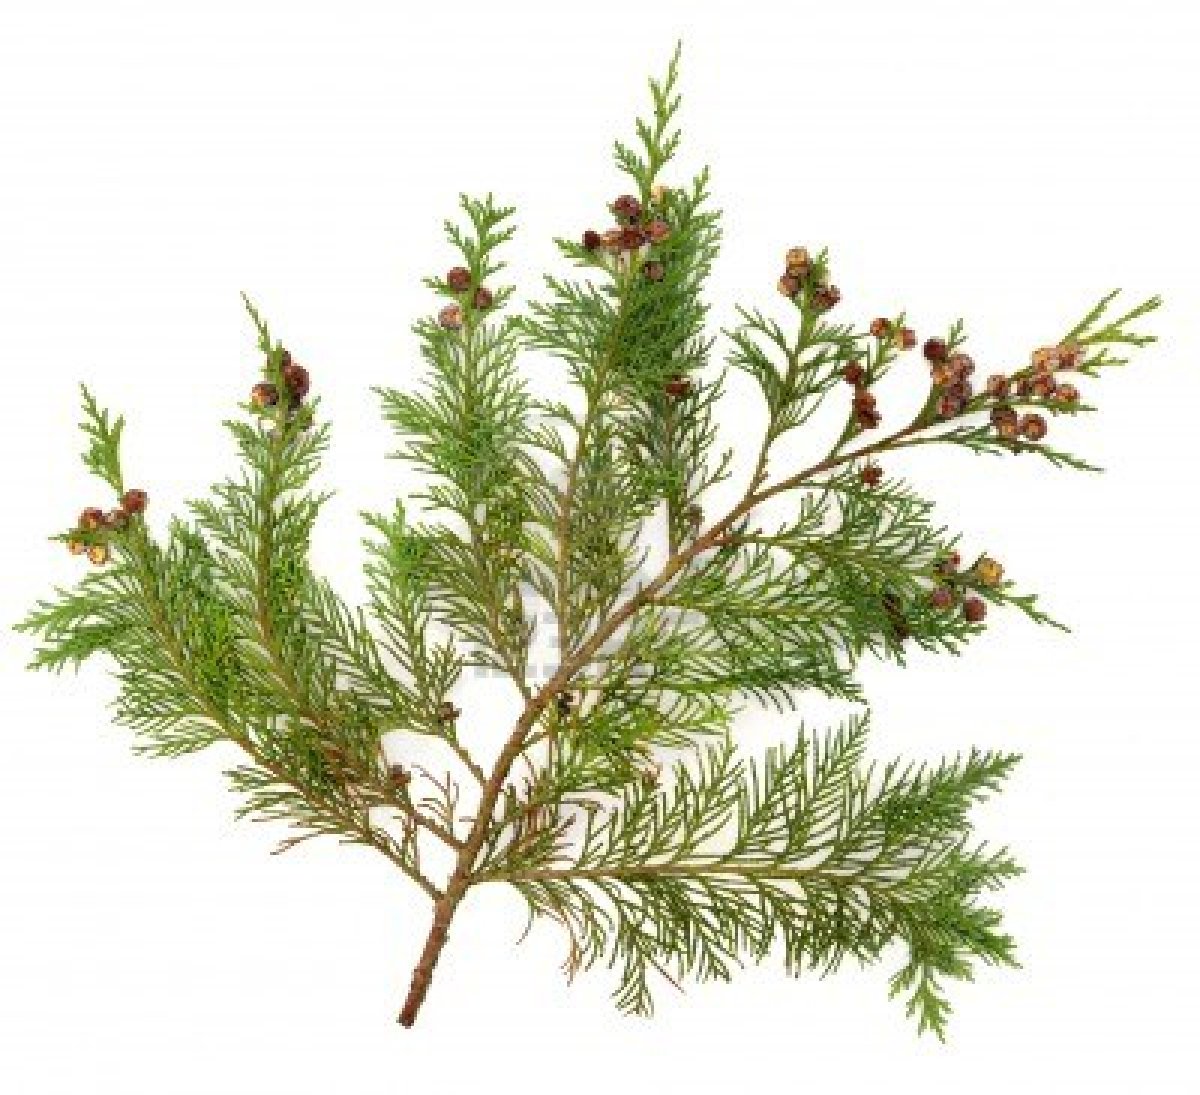 13273770-cedar-cypress-leyland-leaf-branch-with-pine-cones-over-white ...